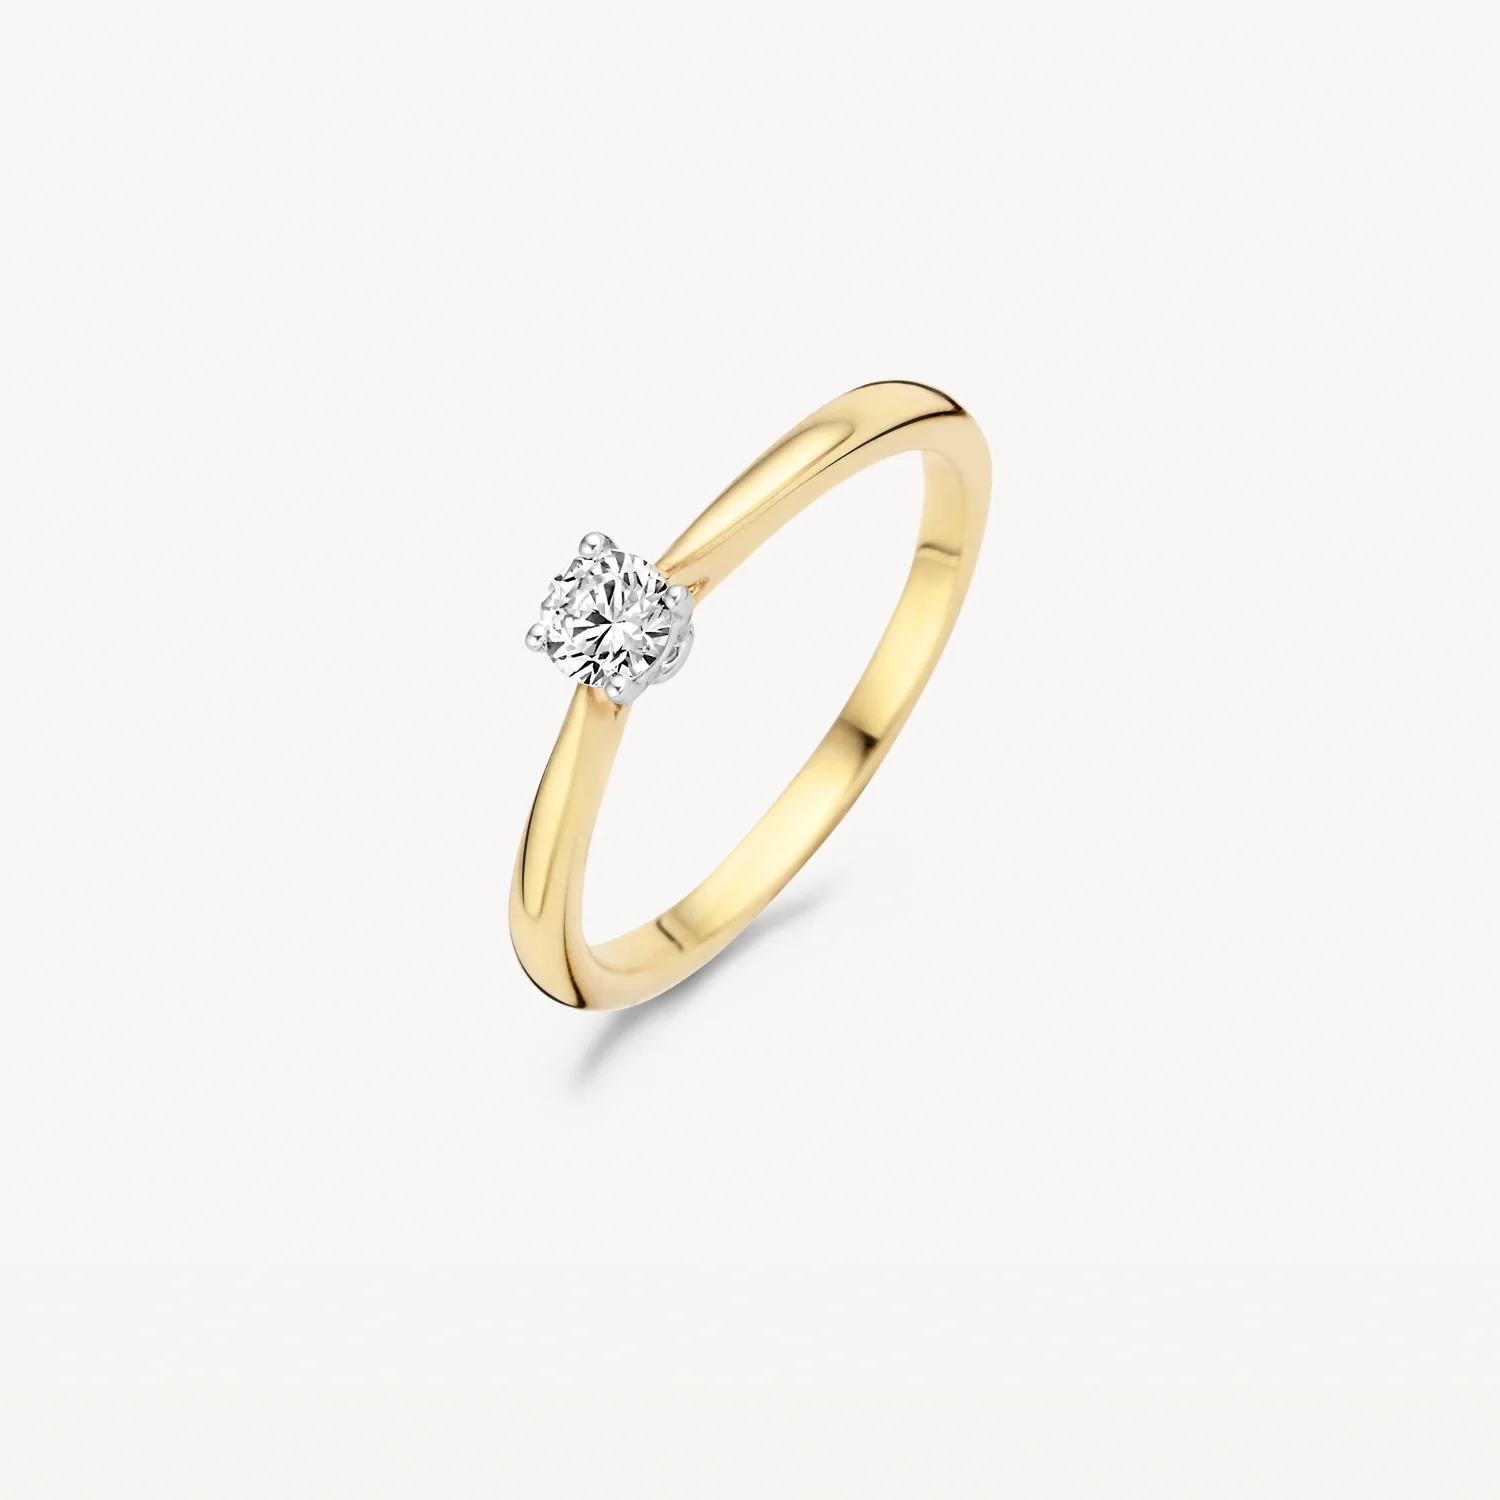 Blush 14ct. Yellow Gold CZ Solitaire Ring